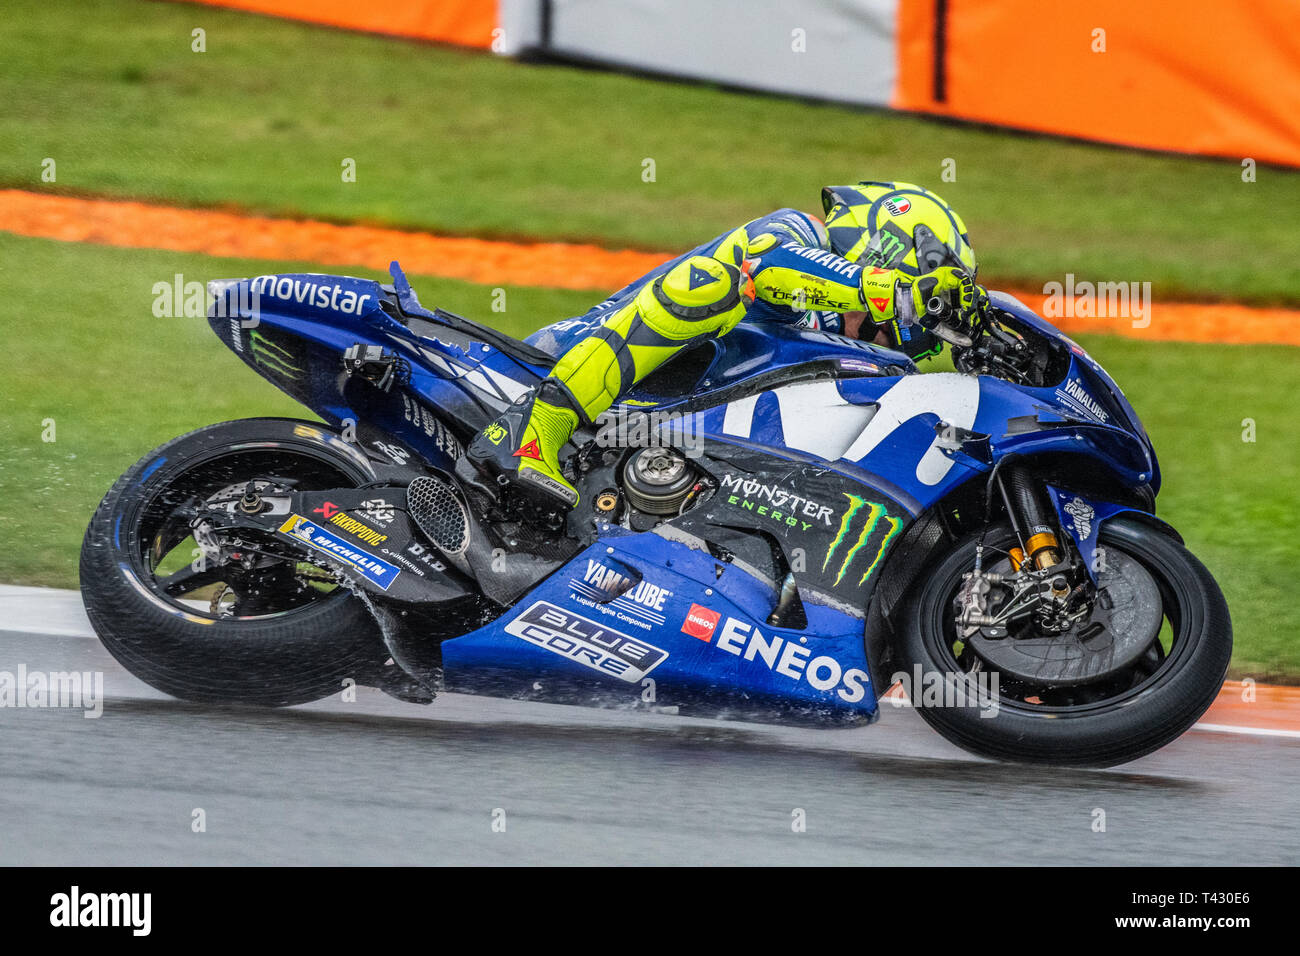 Valencia/Spain - 11/18/2018 - #46 Valentino Rossi (ITA, Yamaha) on his  damaged M1 bike after crashing while chasing #04 Andrea Dovizioso for the  lead Stock Photo - Alamy